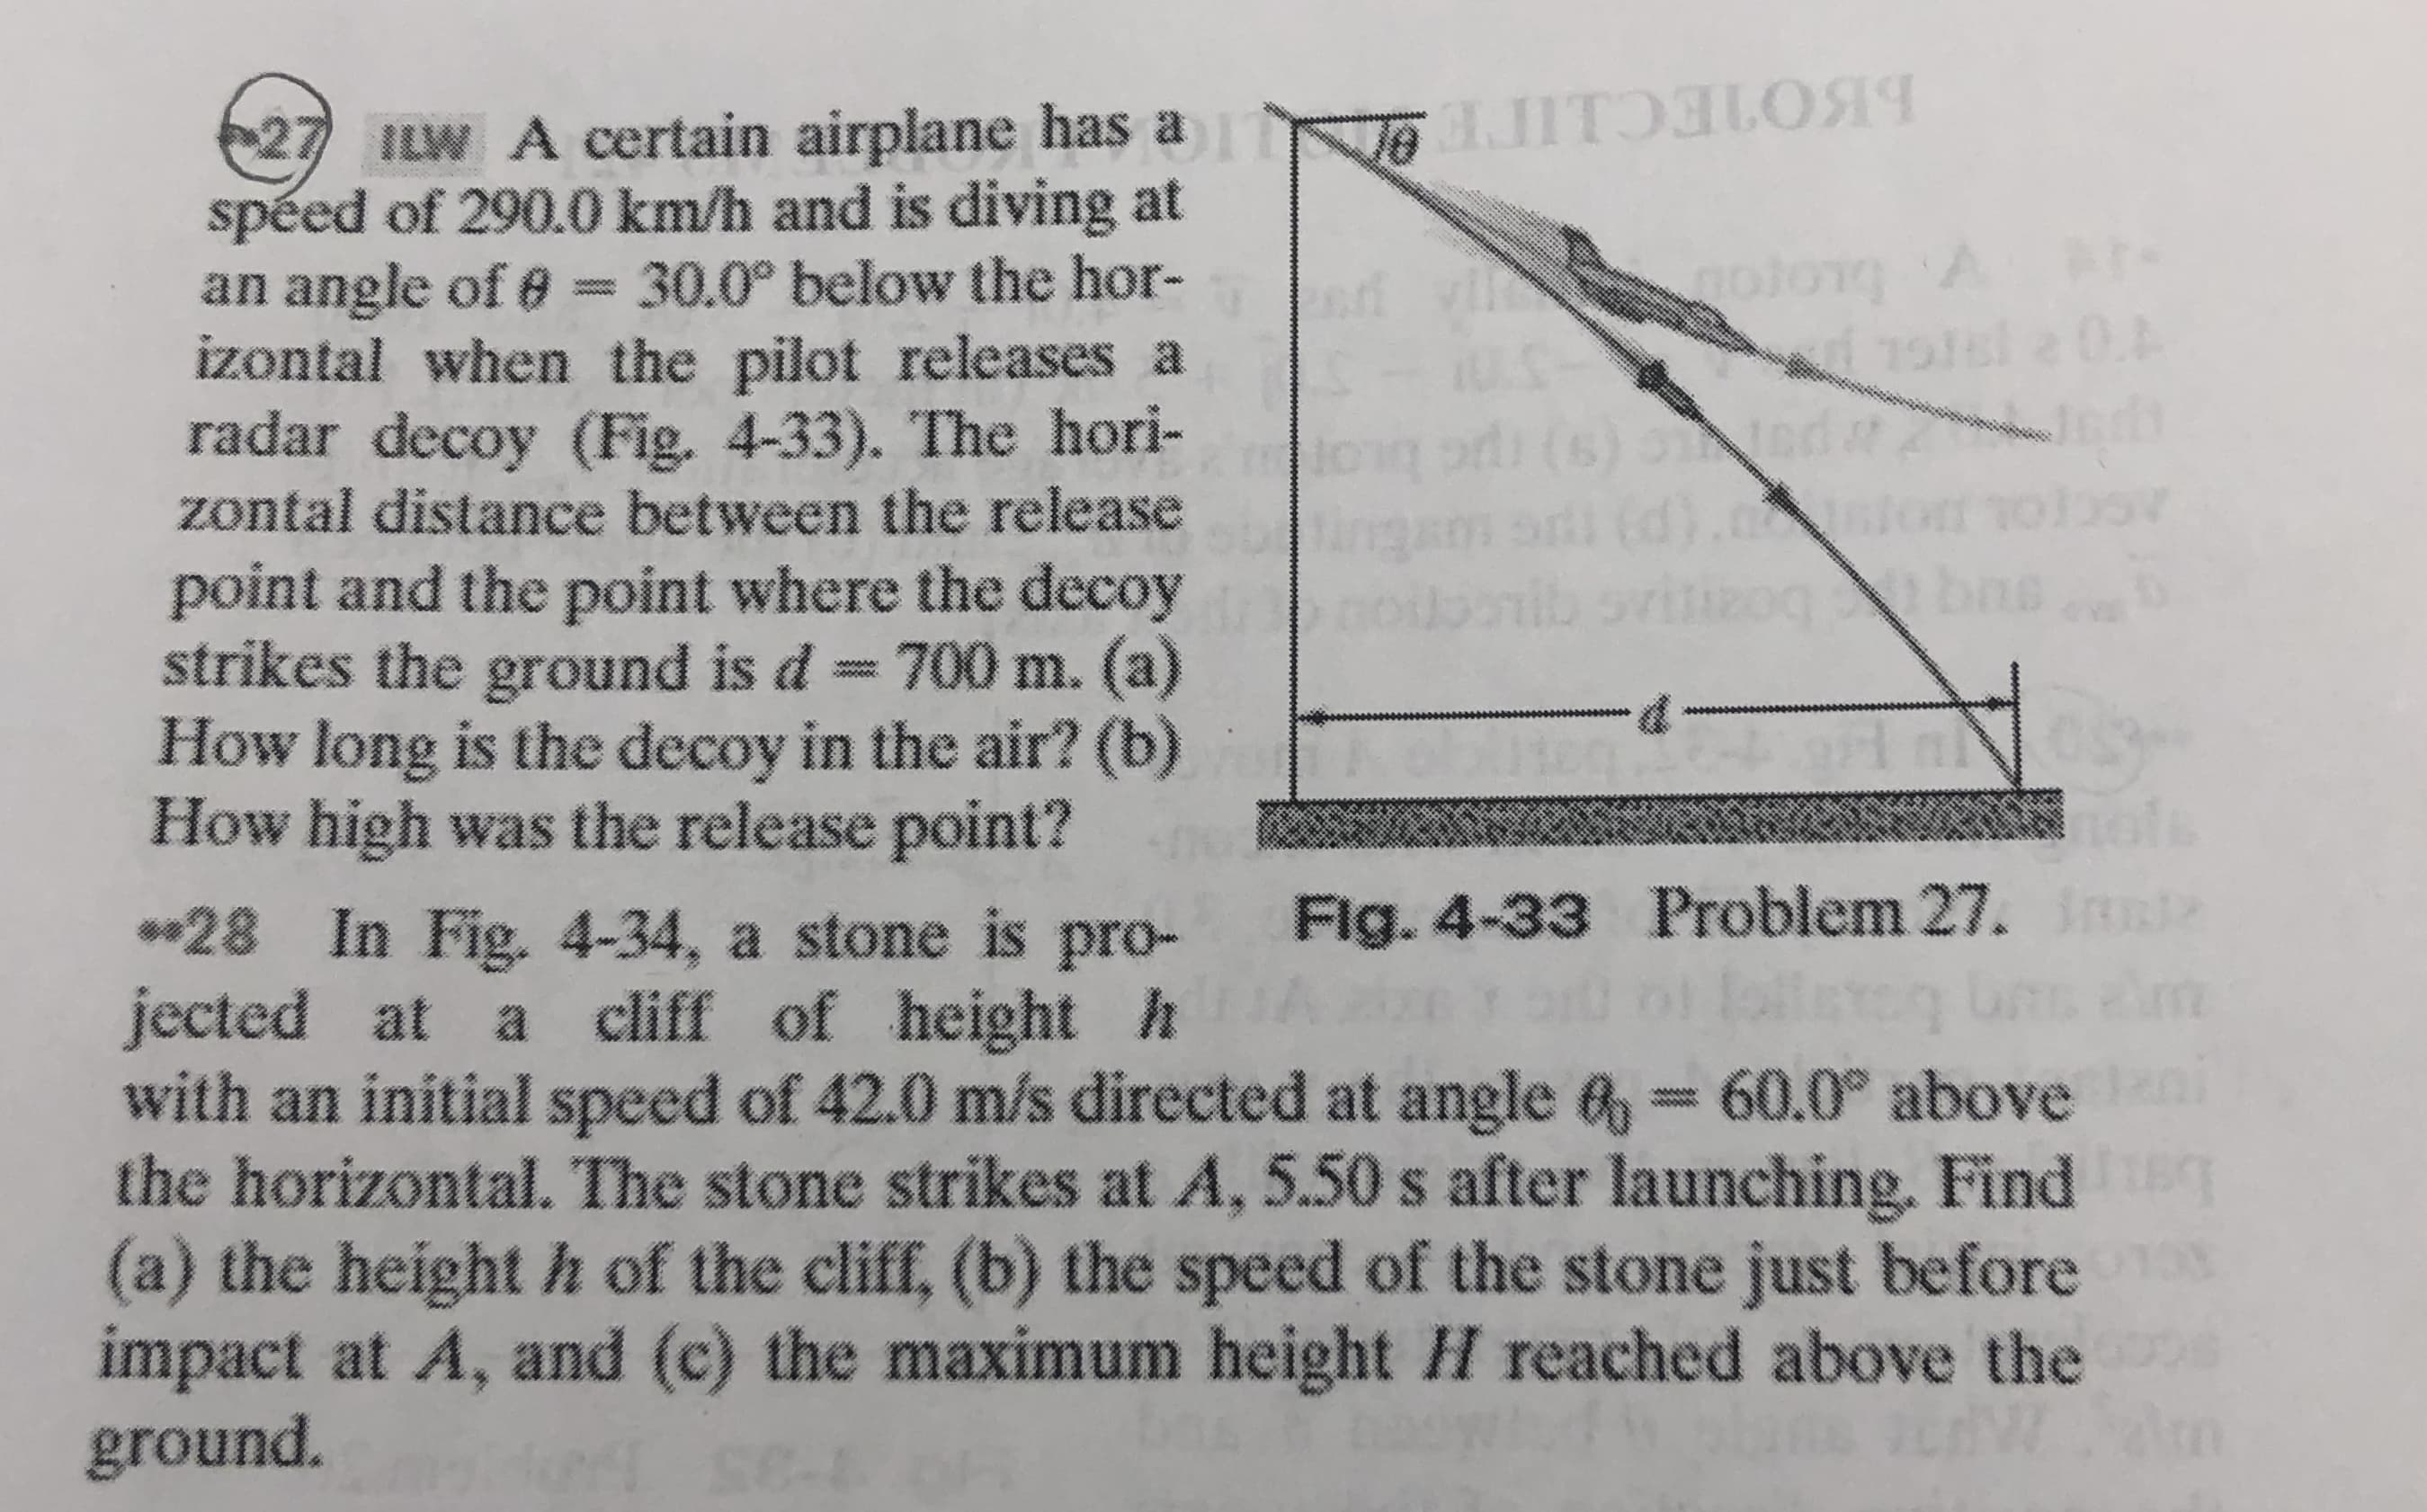 27 ILW A certain airplane has a JITOLO
spéed of 290.0 km/h and is diving at
an angle of e = 30.0° below the hor-
izontal when the pilot releases a
radar decoy (Fig. 4-33). The hori-
zontal distance between the release
(s) oted
point and the point where the decoy
strikes the ground is d 700 m. (a)
How long is the decoy in the air? (b)
How high was the release point?
boan
Fig. 4-33 Problem 27. IRn
*28 In Fig. 4-34, a stone is pro-
jected at a cliff of height h
with an initial speed of 42.0 m/s directed at angle &= 60.0° above
the horizontal. The stone strikes at A, 5.50 s after launching. Find
(a) the height h of the cliff, (b) the speed of the stone just before
impact at A, and (c) the maximum height H reached above the
ground.
